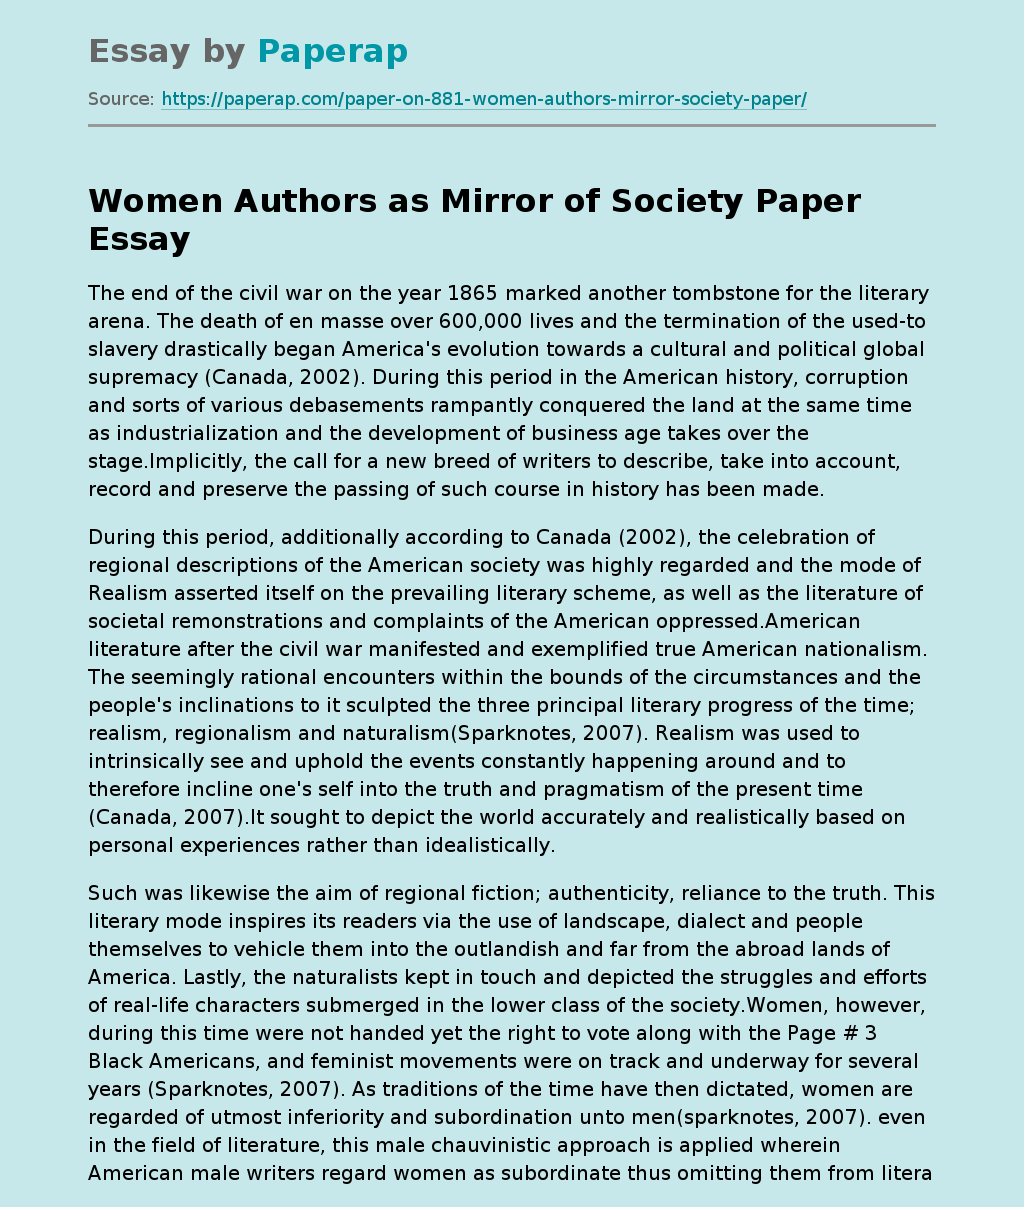 Women Authors as Mirror of Society Paper